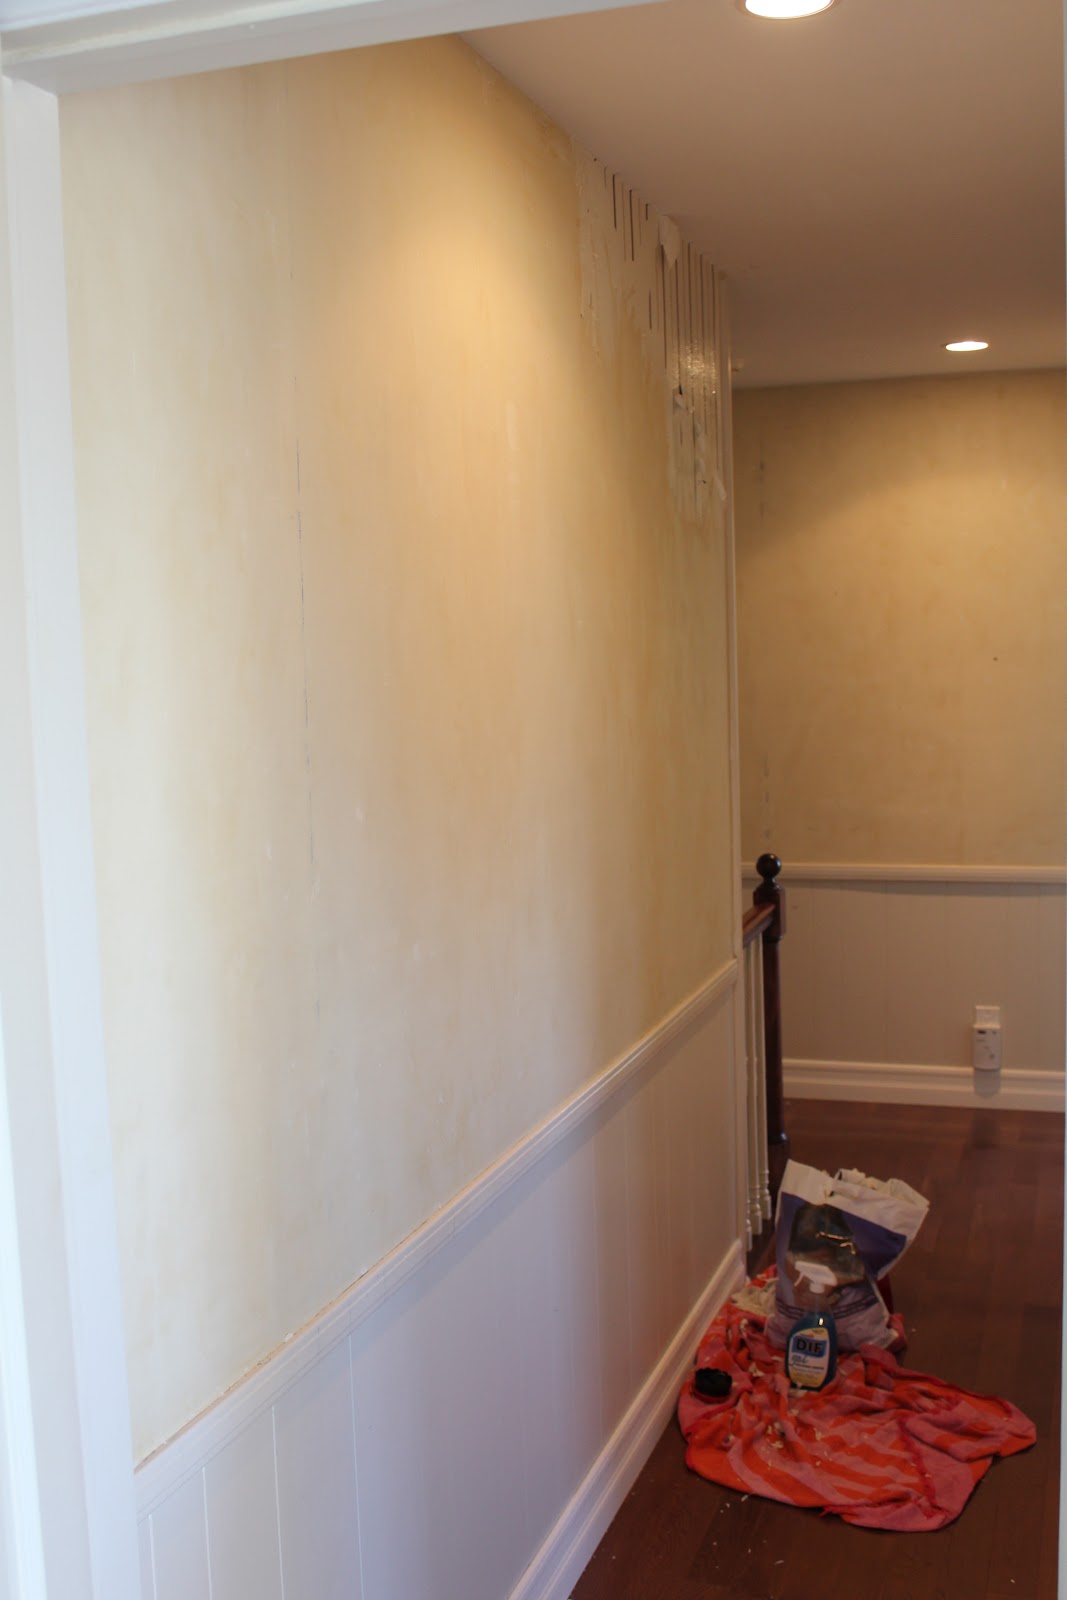 Wallpaper And Wainscoting Over The Last